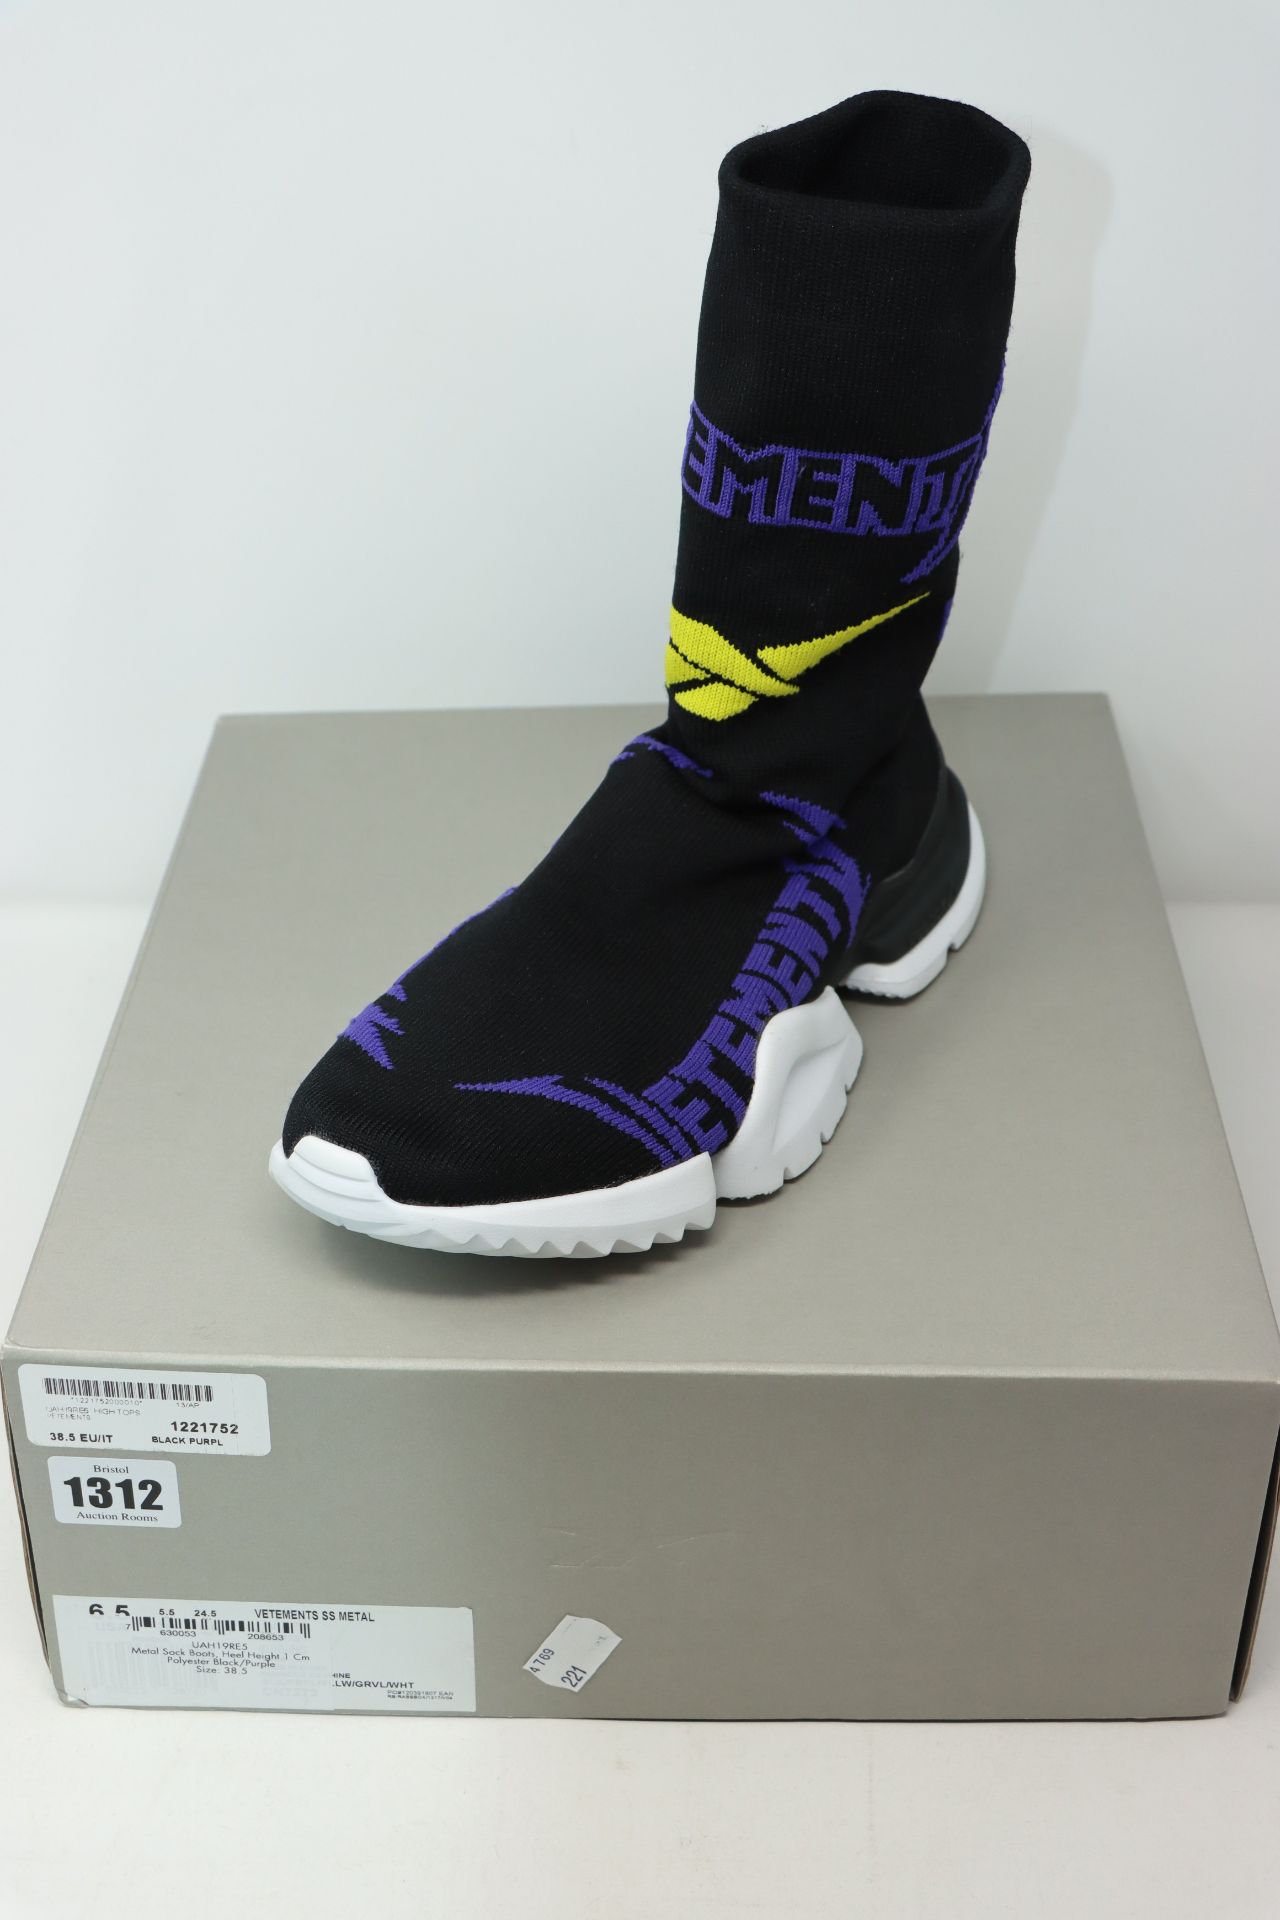 One as new Vetements Black/Purple sock trainers size UK 5.5 (UAH19RE5).